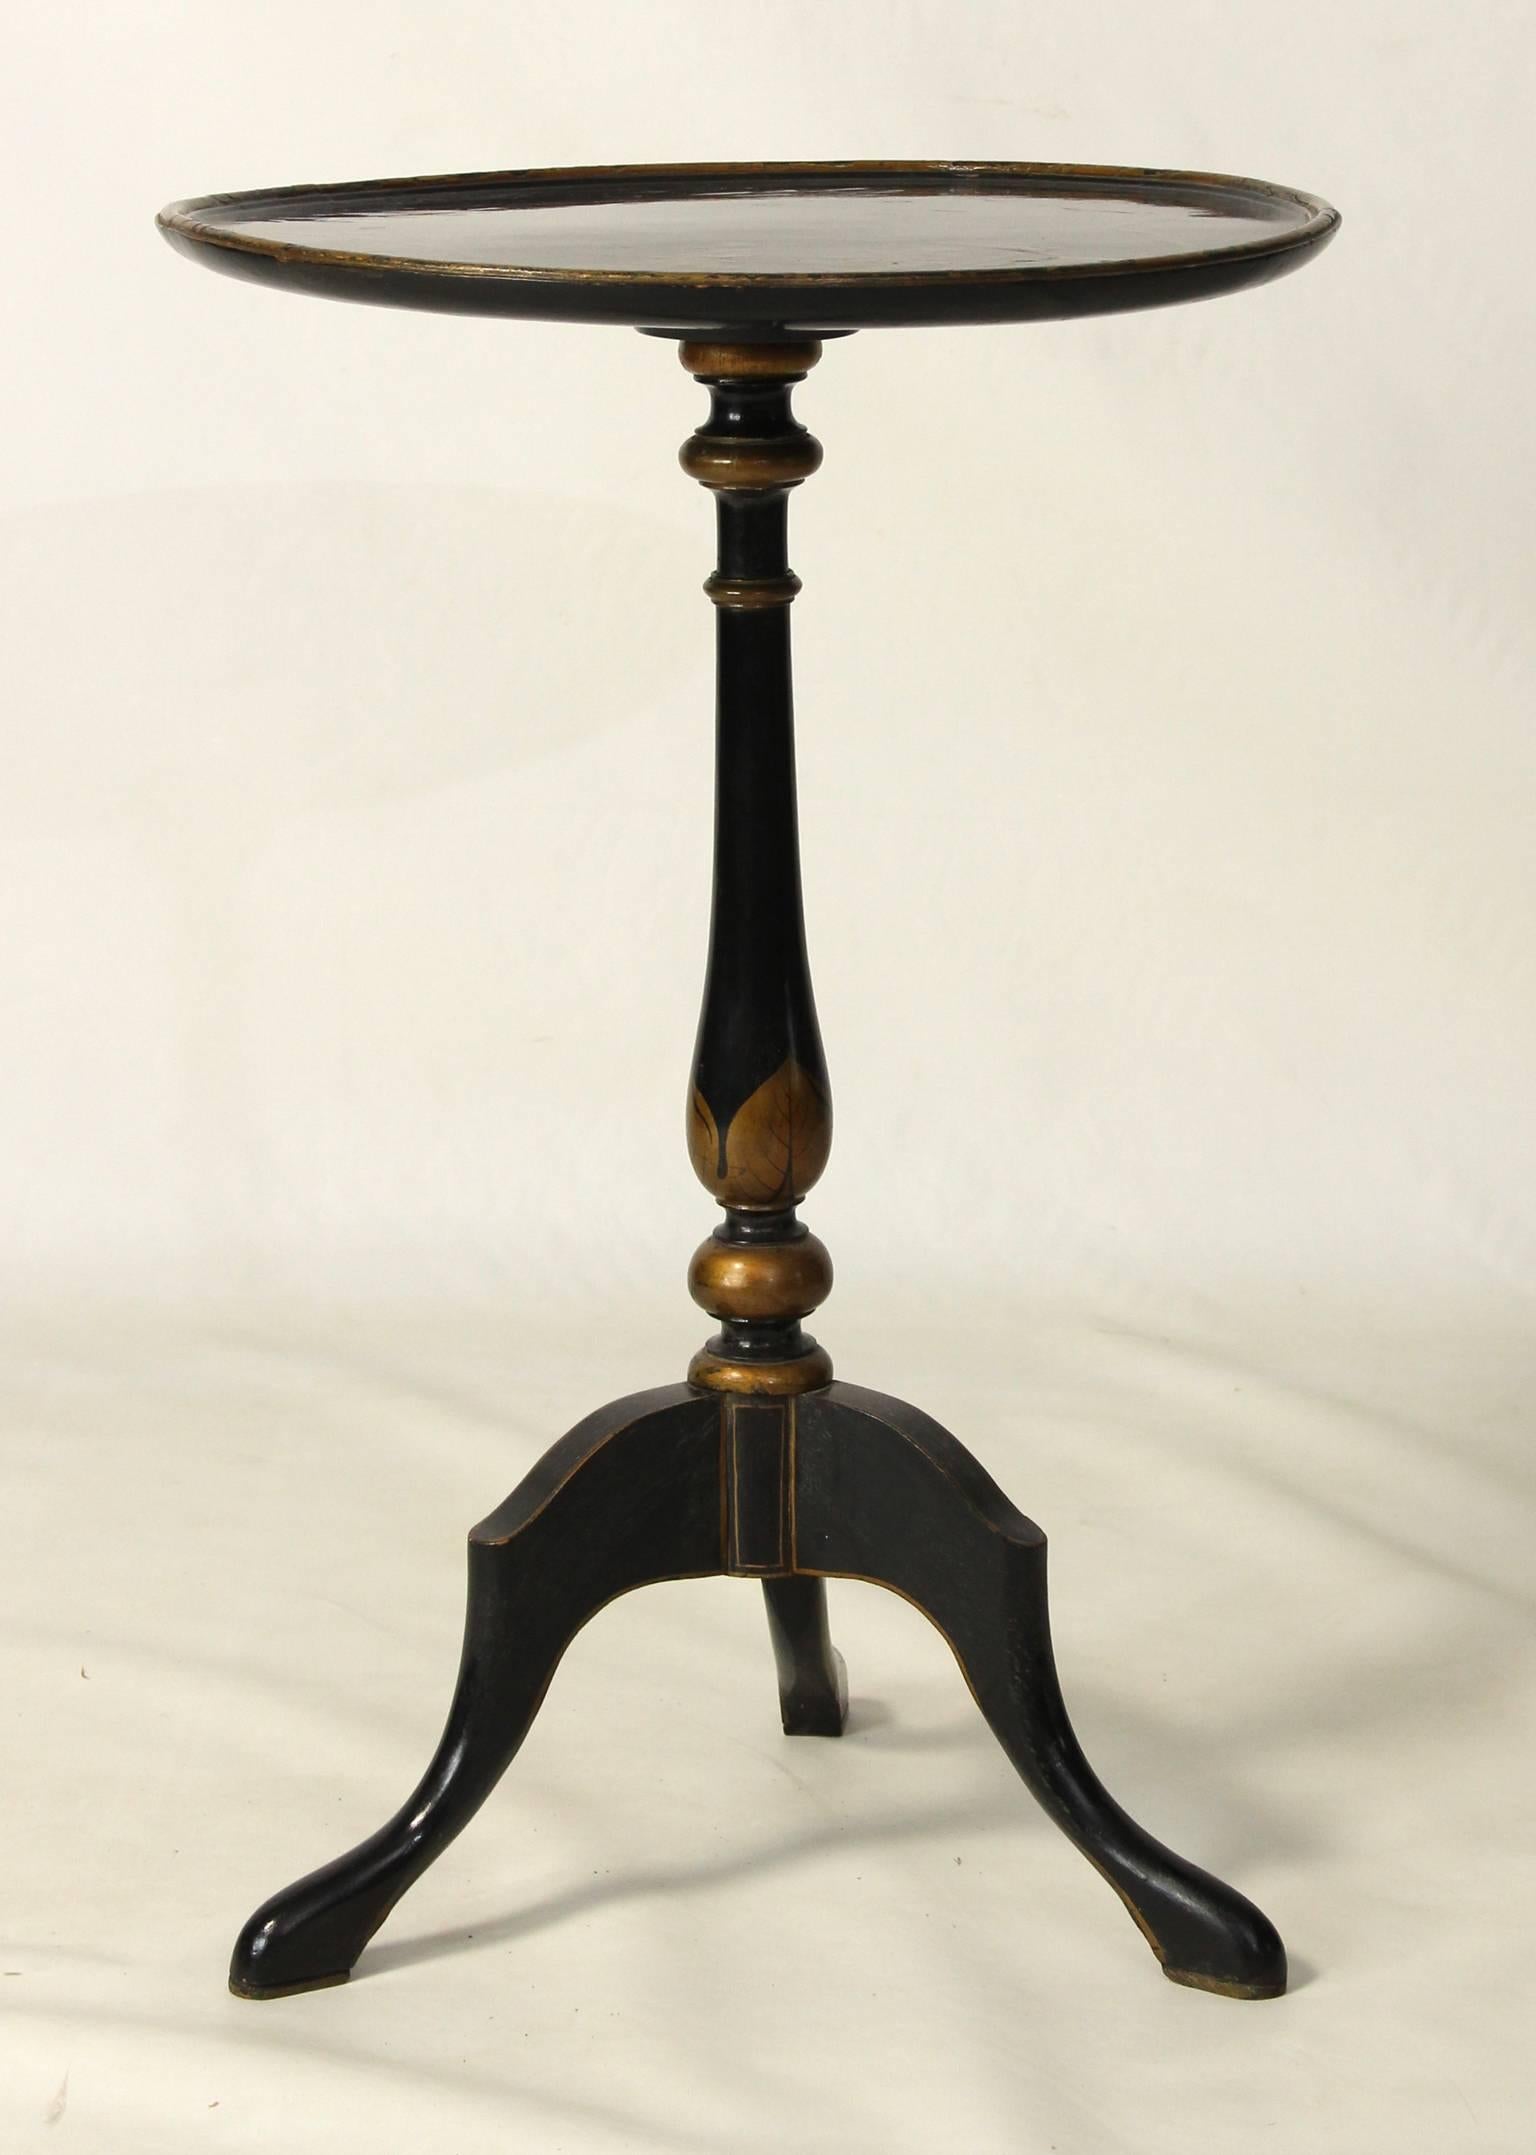 An early 20th century ebonized and chinoiserie decorated candle stand table. 